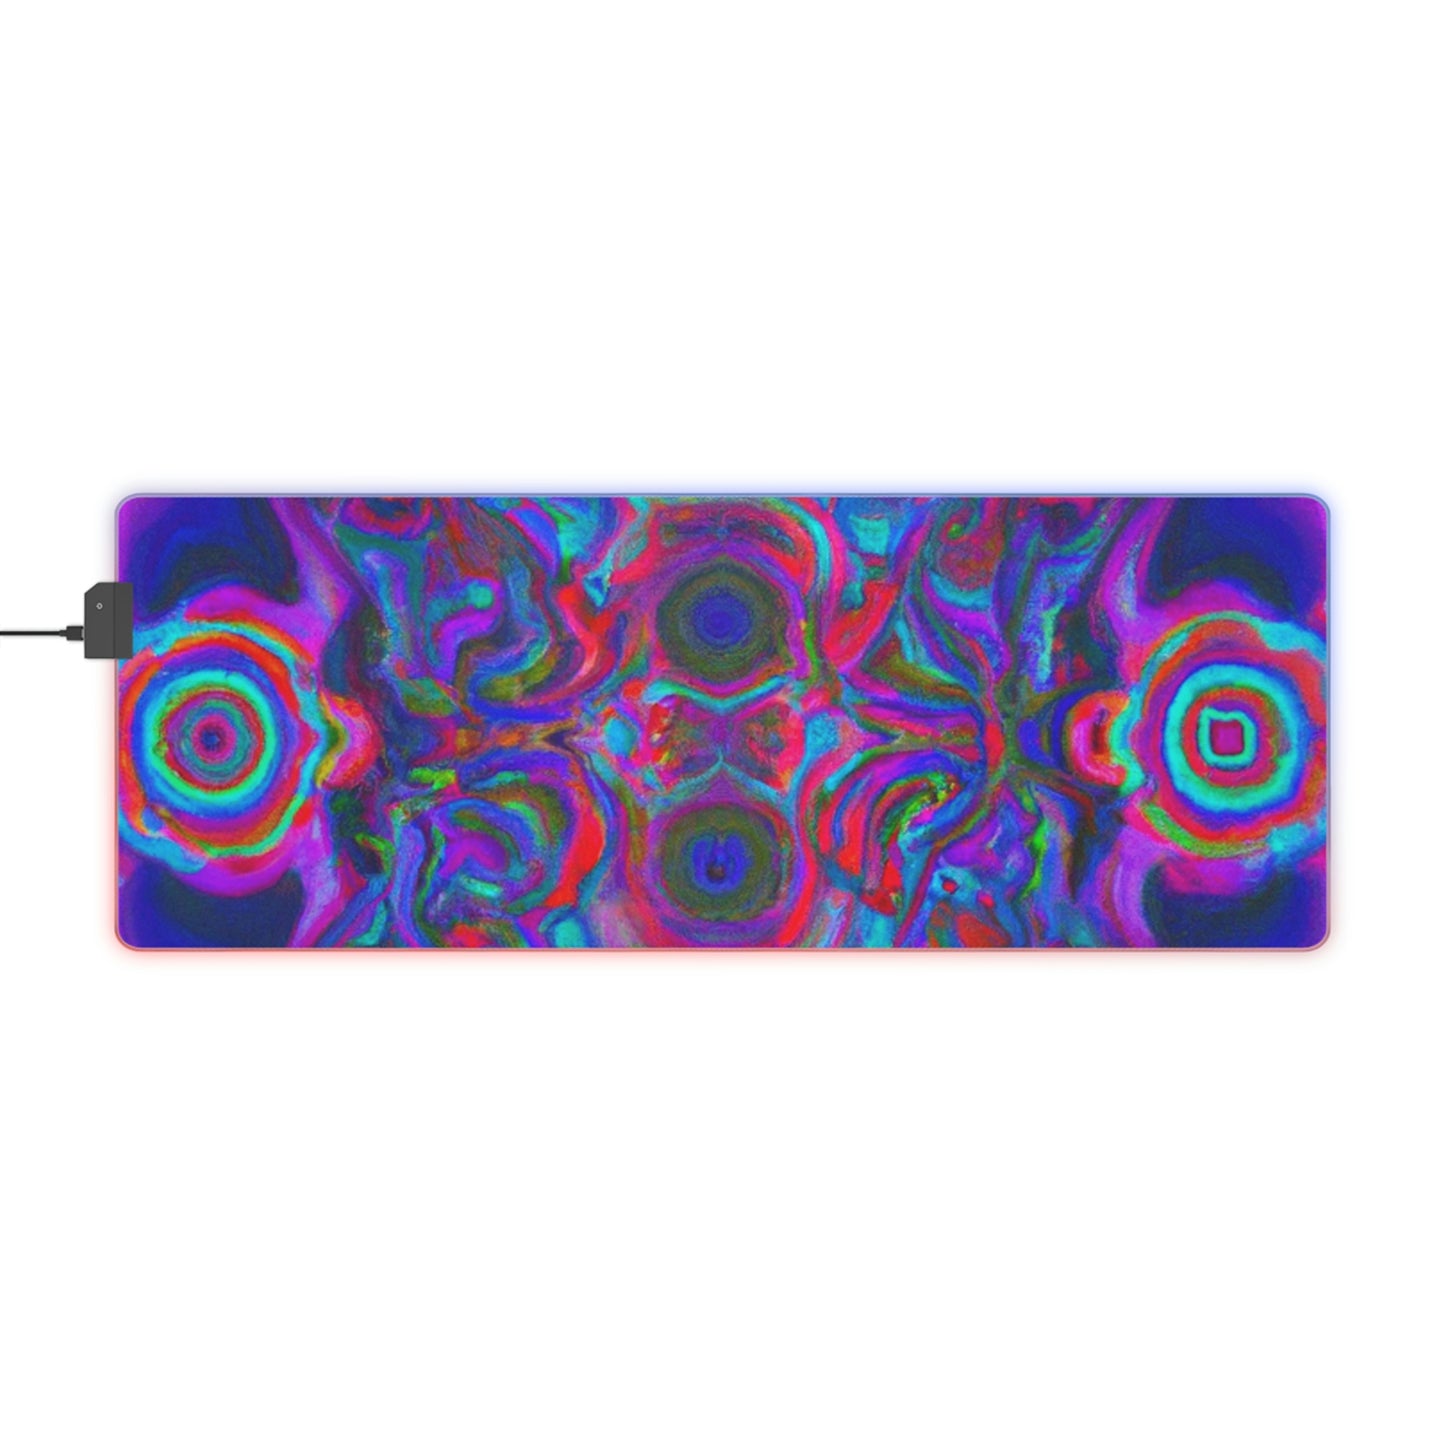 Bix Boppin' Tom - Psychedelic Trippy LED Light Up Gaming Mouse Pad